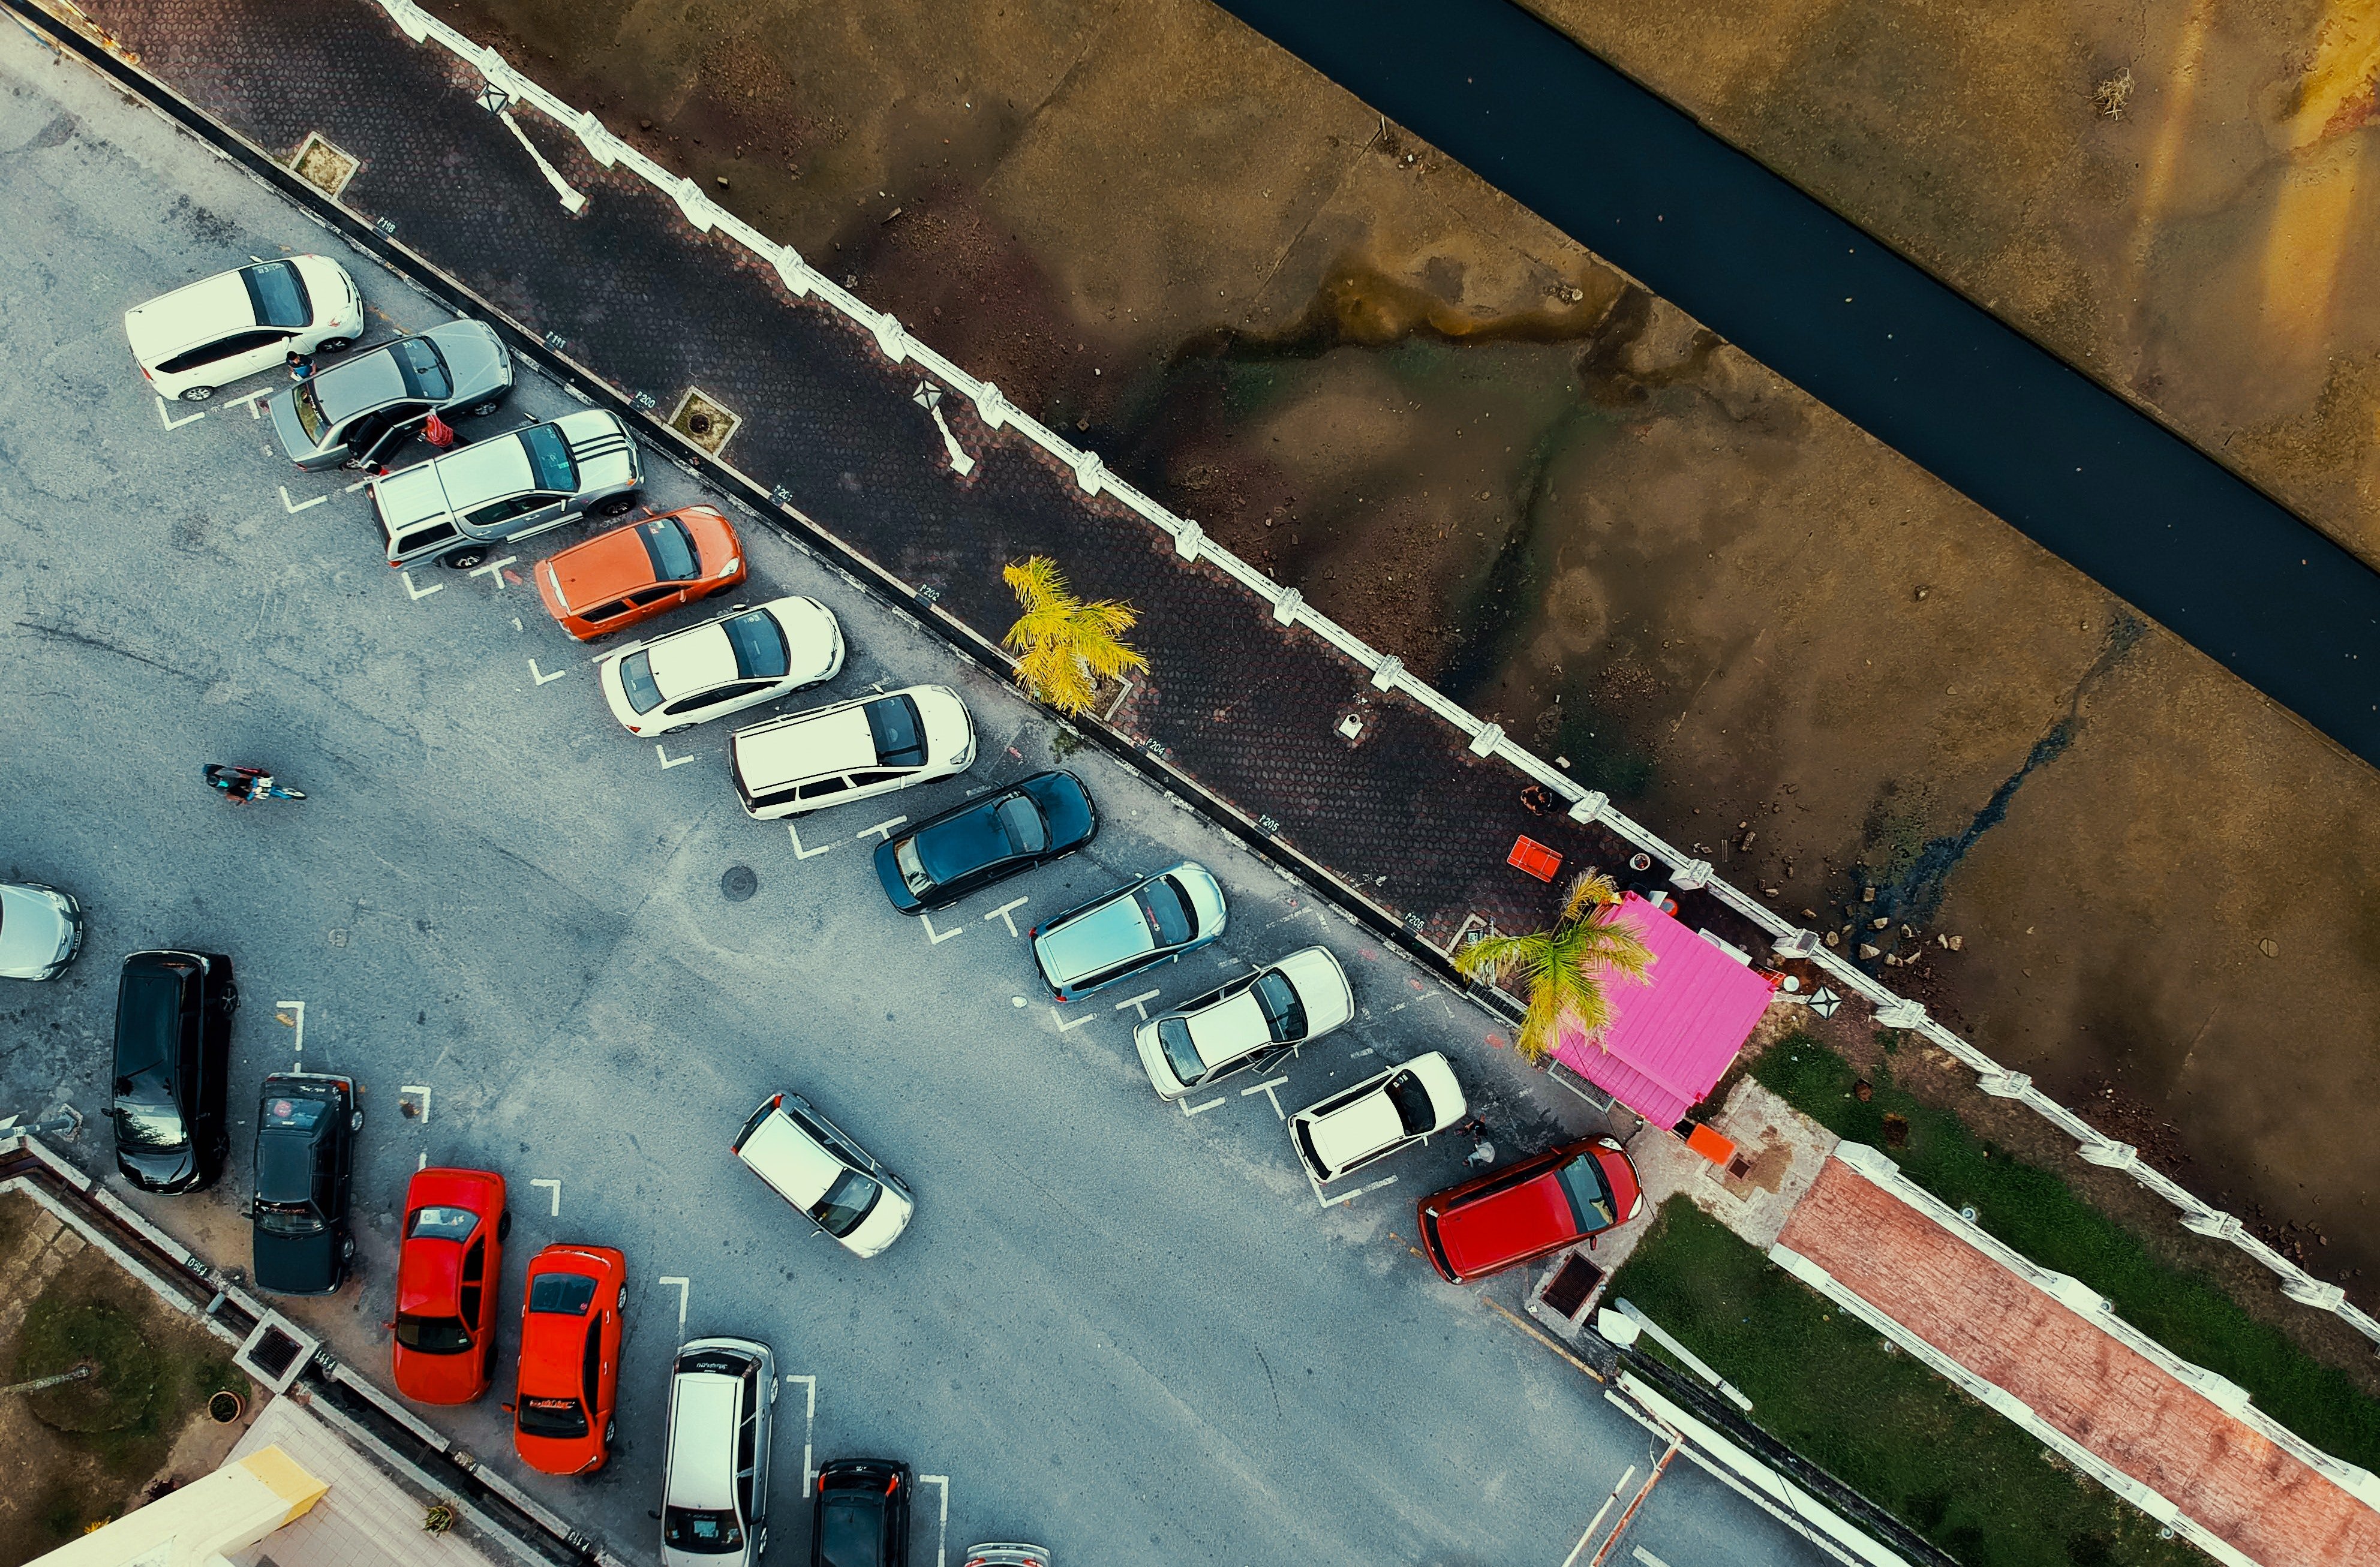 Pictured - An aerial view of parked vehicles in a parking lot | Source: Pexles 